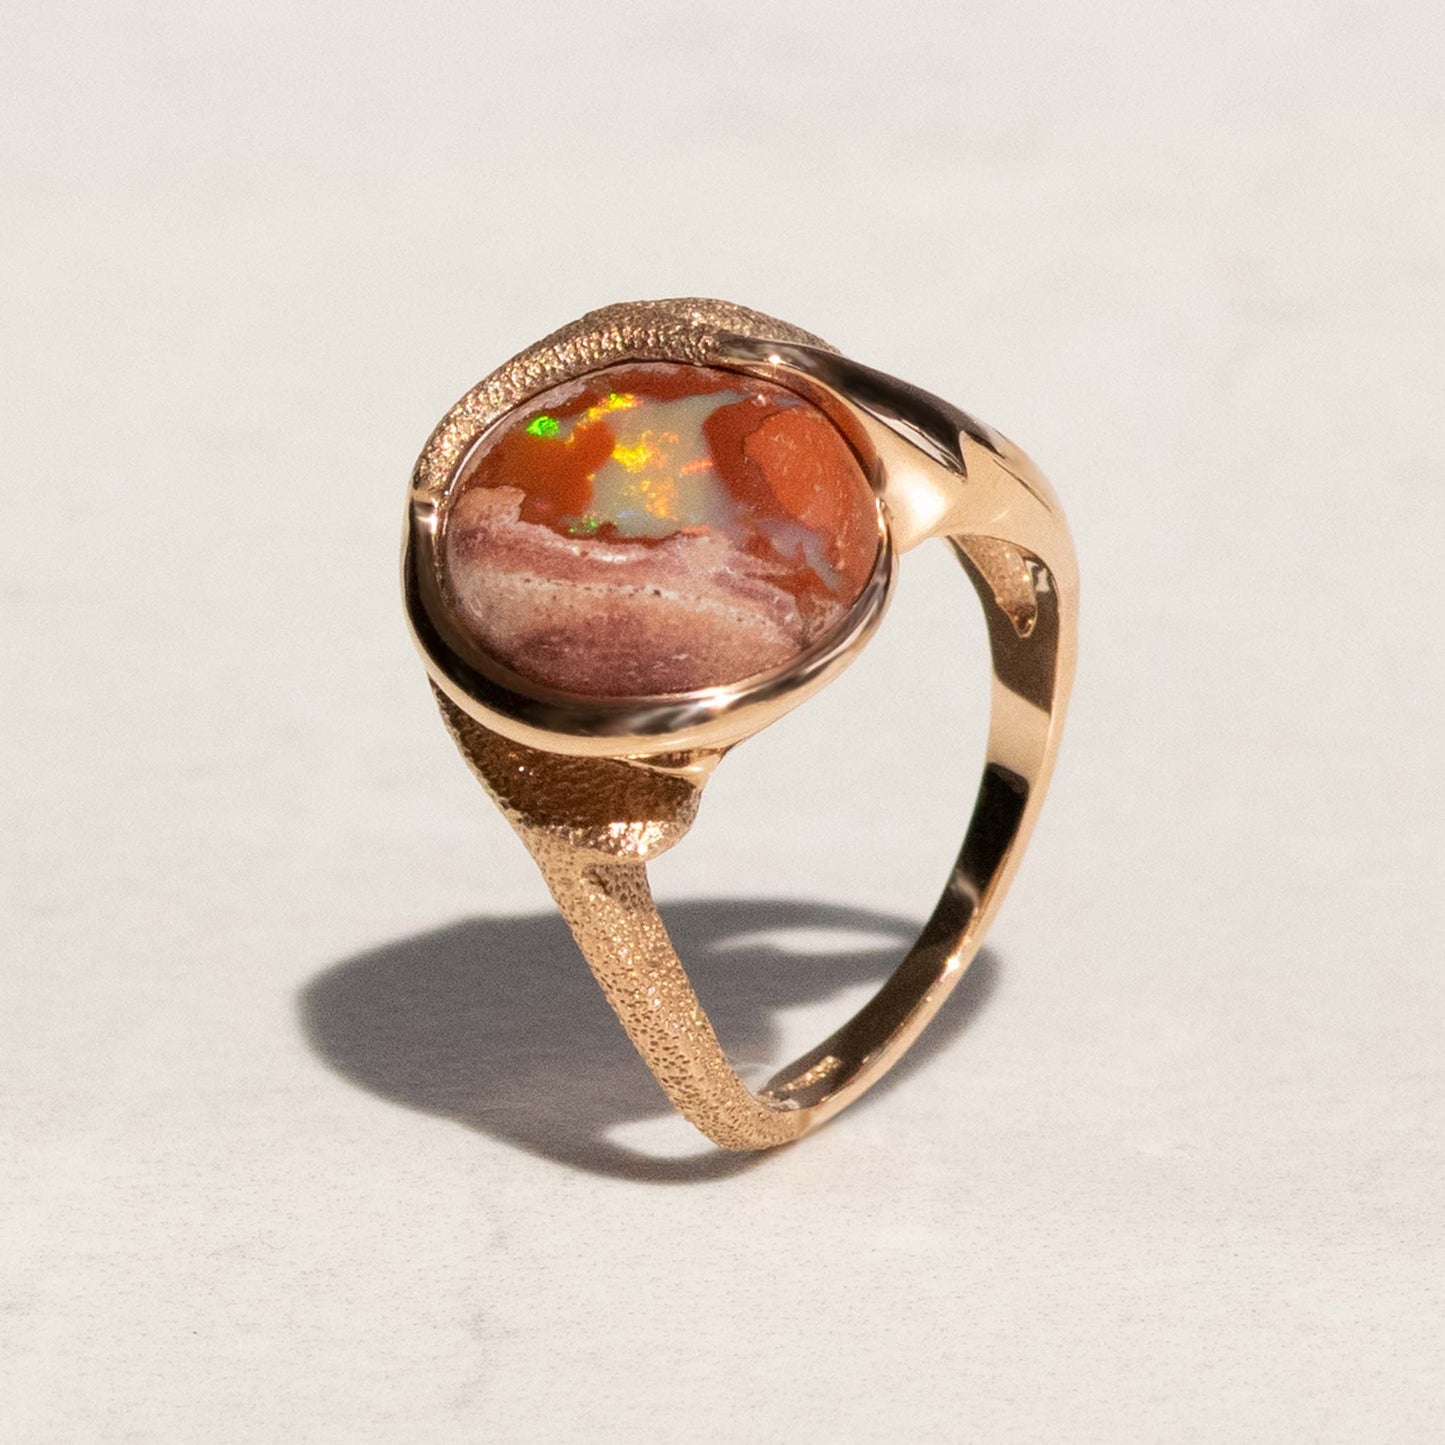 Orme-Brown Contemporary Fine Jewellery Ethical Arrow Statement Ring in sustainable recycled 18ct rose gold and a round Mexican fire opal (TipToe)